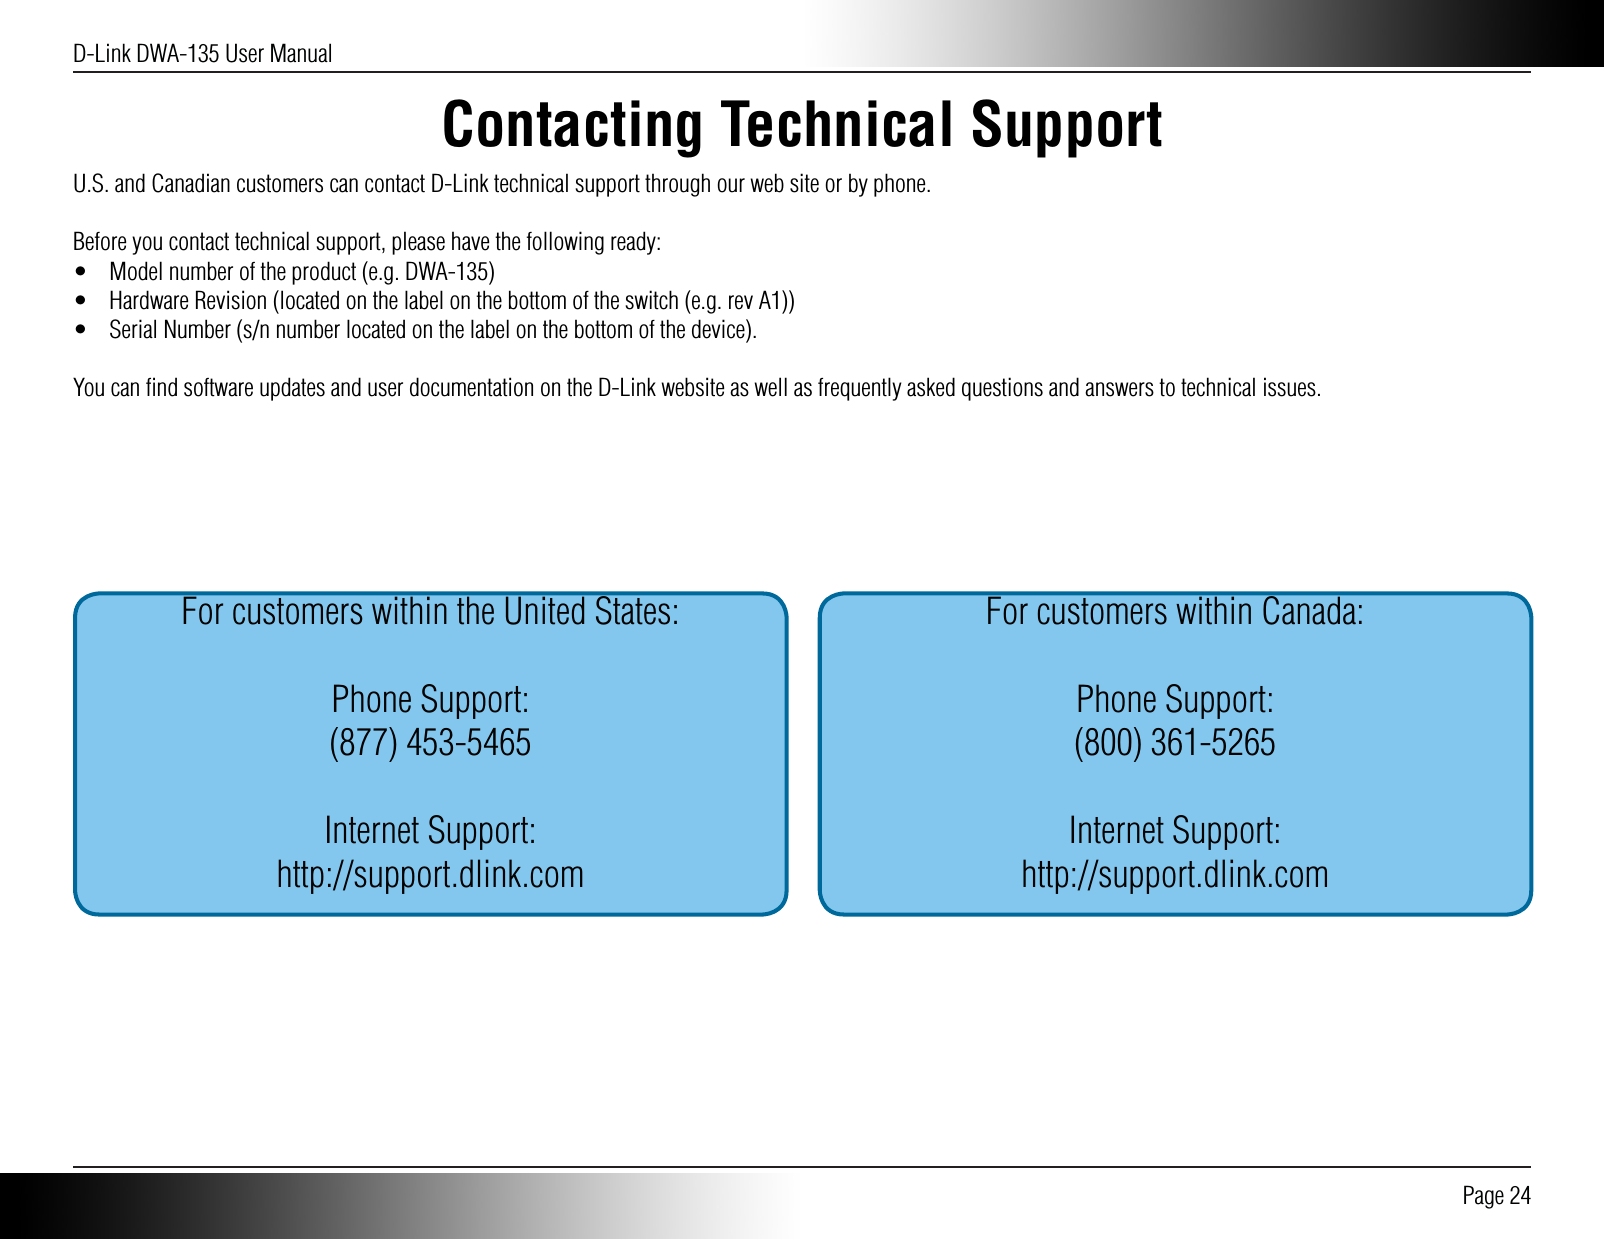 D-Link DWA-135 User Manual Page 24Contacting Technical SupportU.S. and Canadian customers can contact D-Link technical support through our web site or by phone.Before you contact technical support, please have the following ready:•  Model number of the product (e.g. DWA-135)•  Hardware Revision (located on the label on the bottom of the switch (e.g. rev A1))•  Serial Number (s/n number located on the label on the bottom of the device).You can ﬁnd software updates and user documentation on the D-Link website as well as frequently asked questions and answers to technical issues.For customers within the United States:Phone Support:(877) 453-5465Internet Support:http://support.dlink.comFor customers within Canada:Phone Support:(800) 361-5265Internet Support:http://support.dlink.com